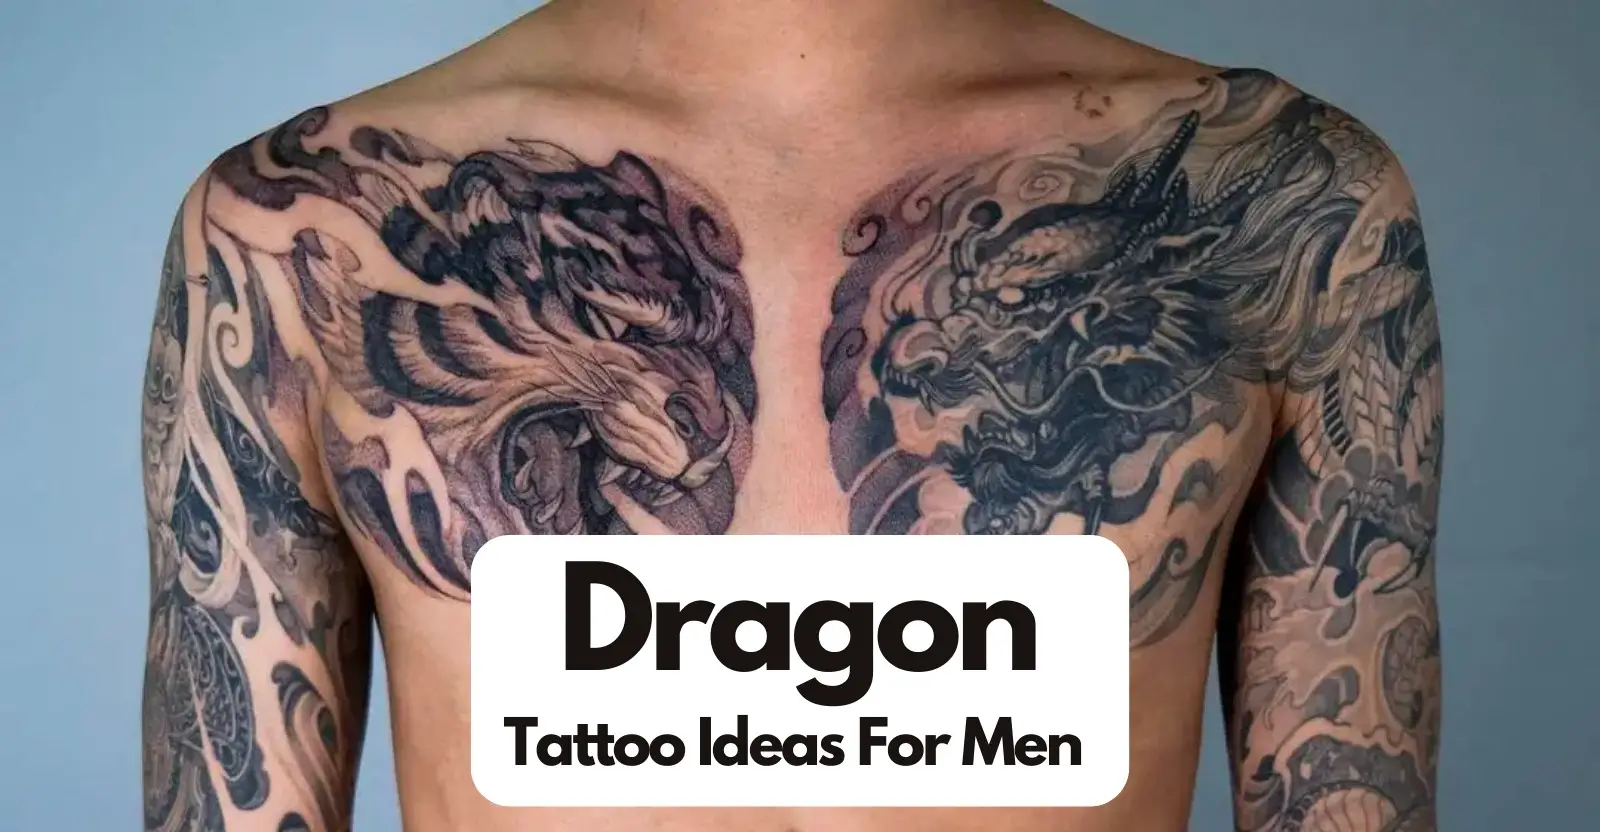 Dragon Back Tattoos  Photos of Works By Pro Tattoo Artists at theYou